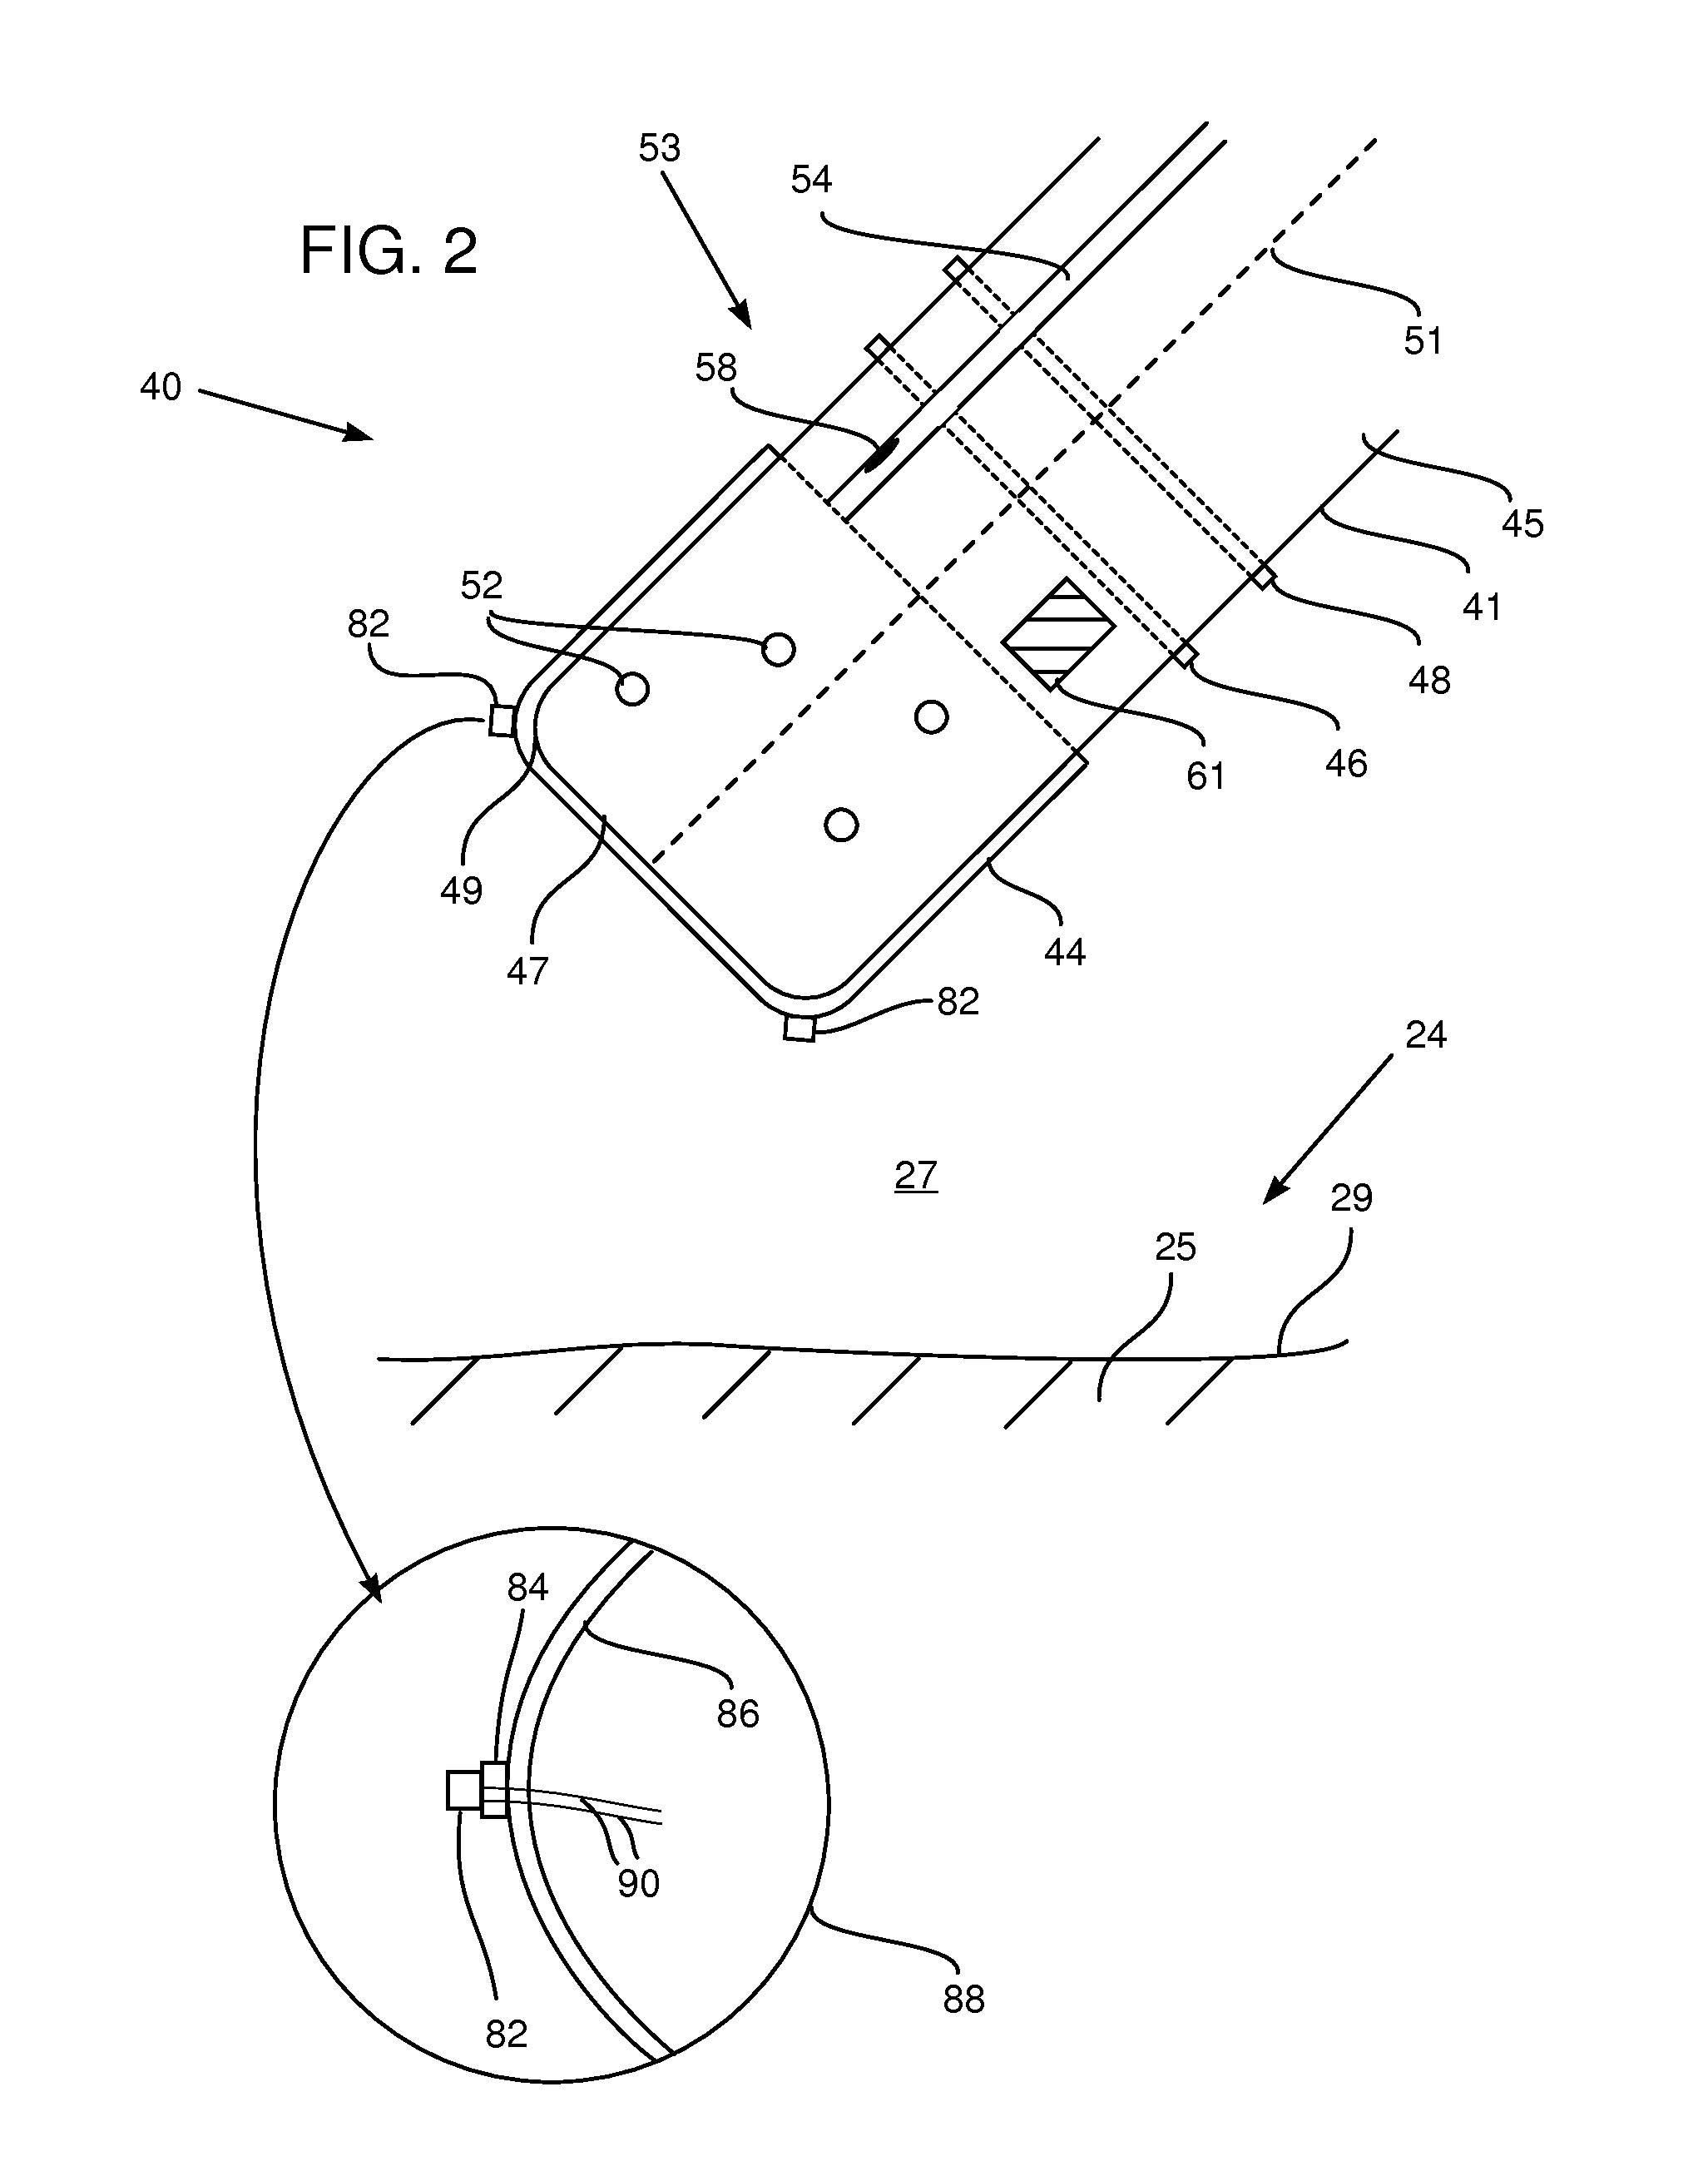 Monitoring tissue temperature while using an irrigated catheter